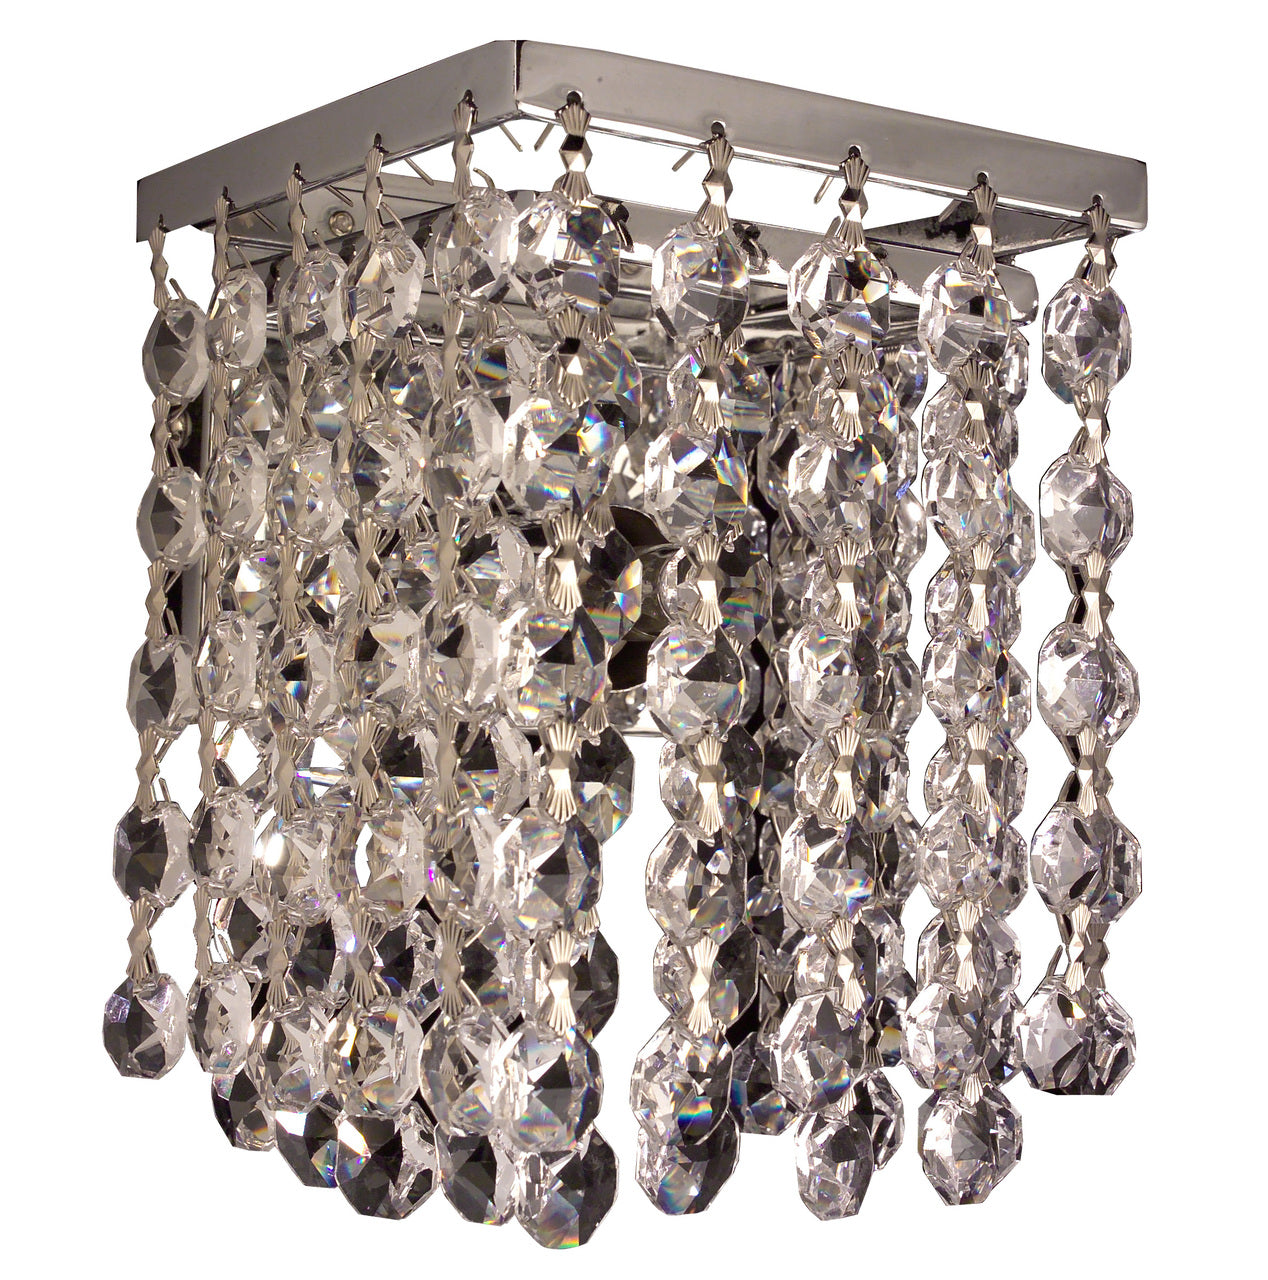 Classic Lighting 16102 BLK-CP Bedazzle Crystal Wall Sconce in Chrome